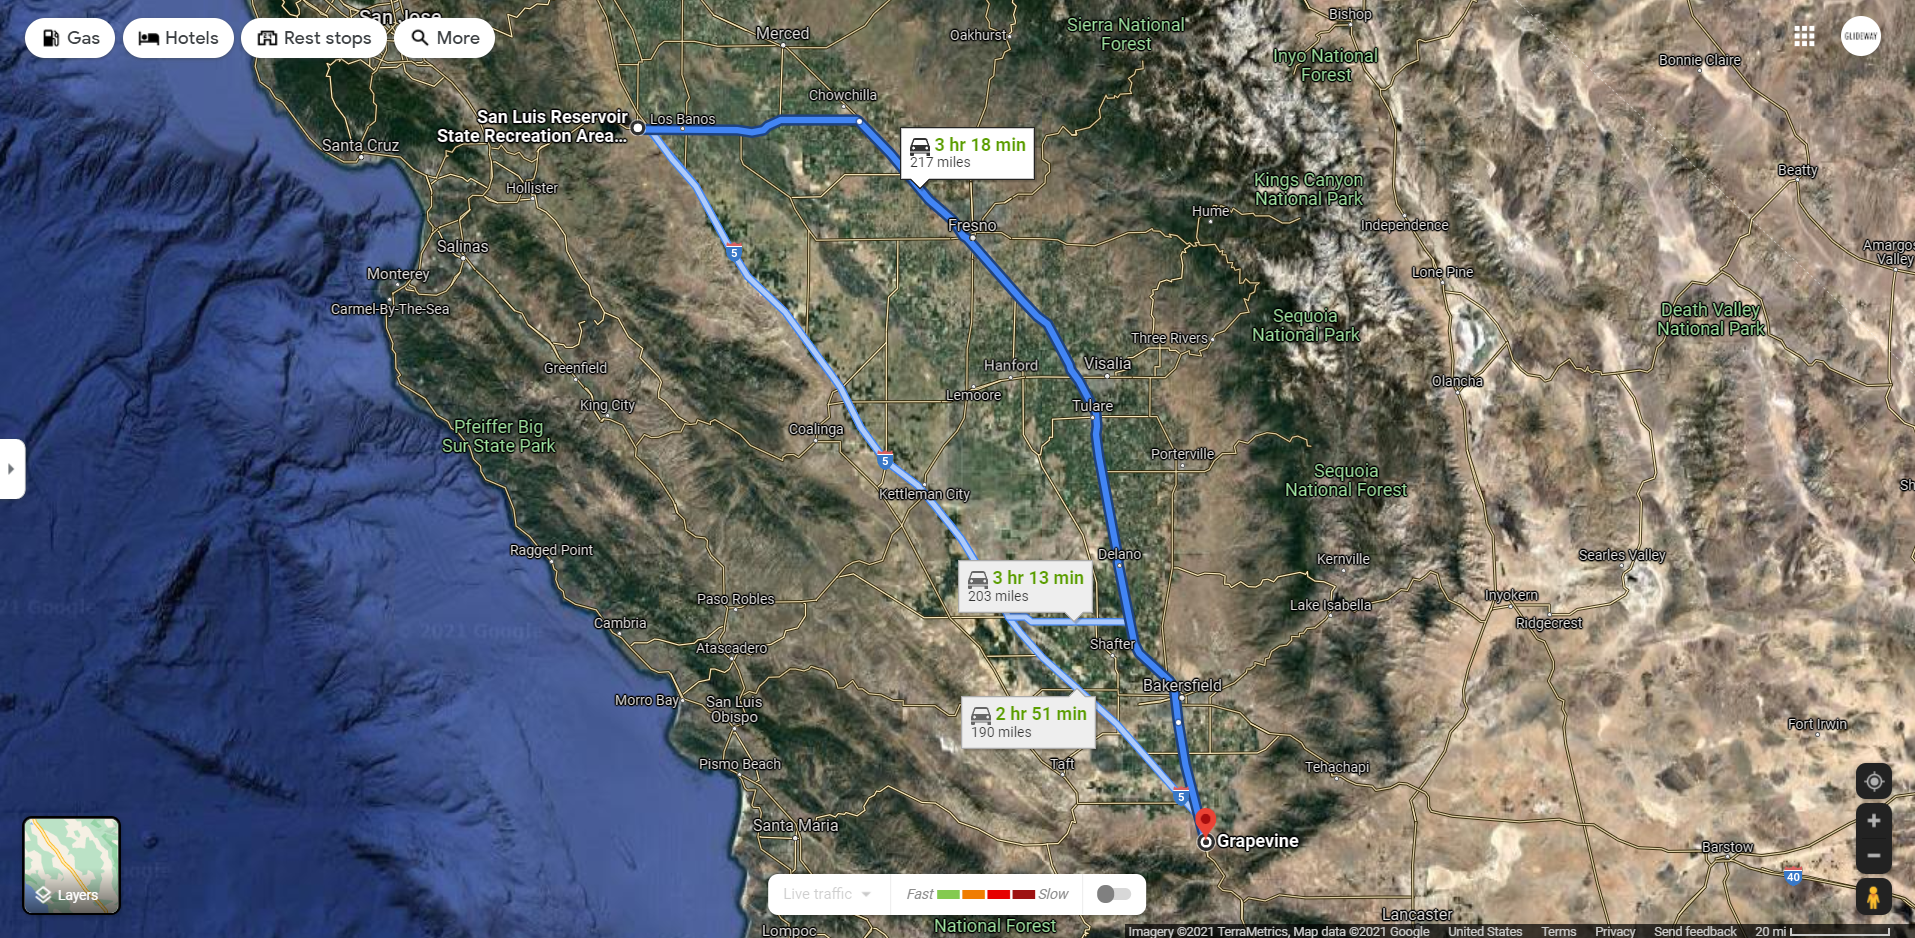 Proposed location for Grapevine, CA Glideway EMP Loop TAIL facility on Interstate 5 in California